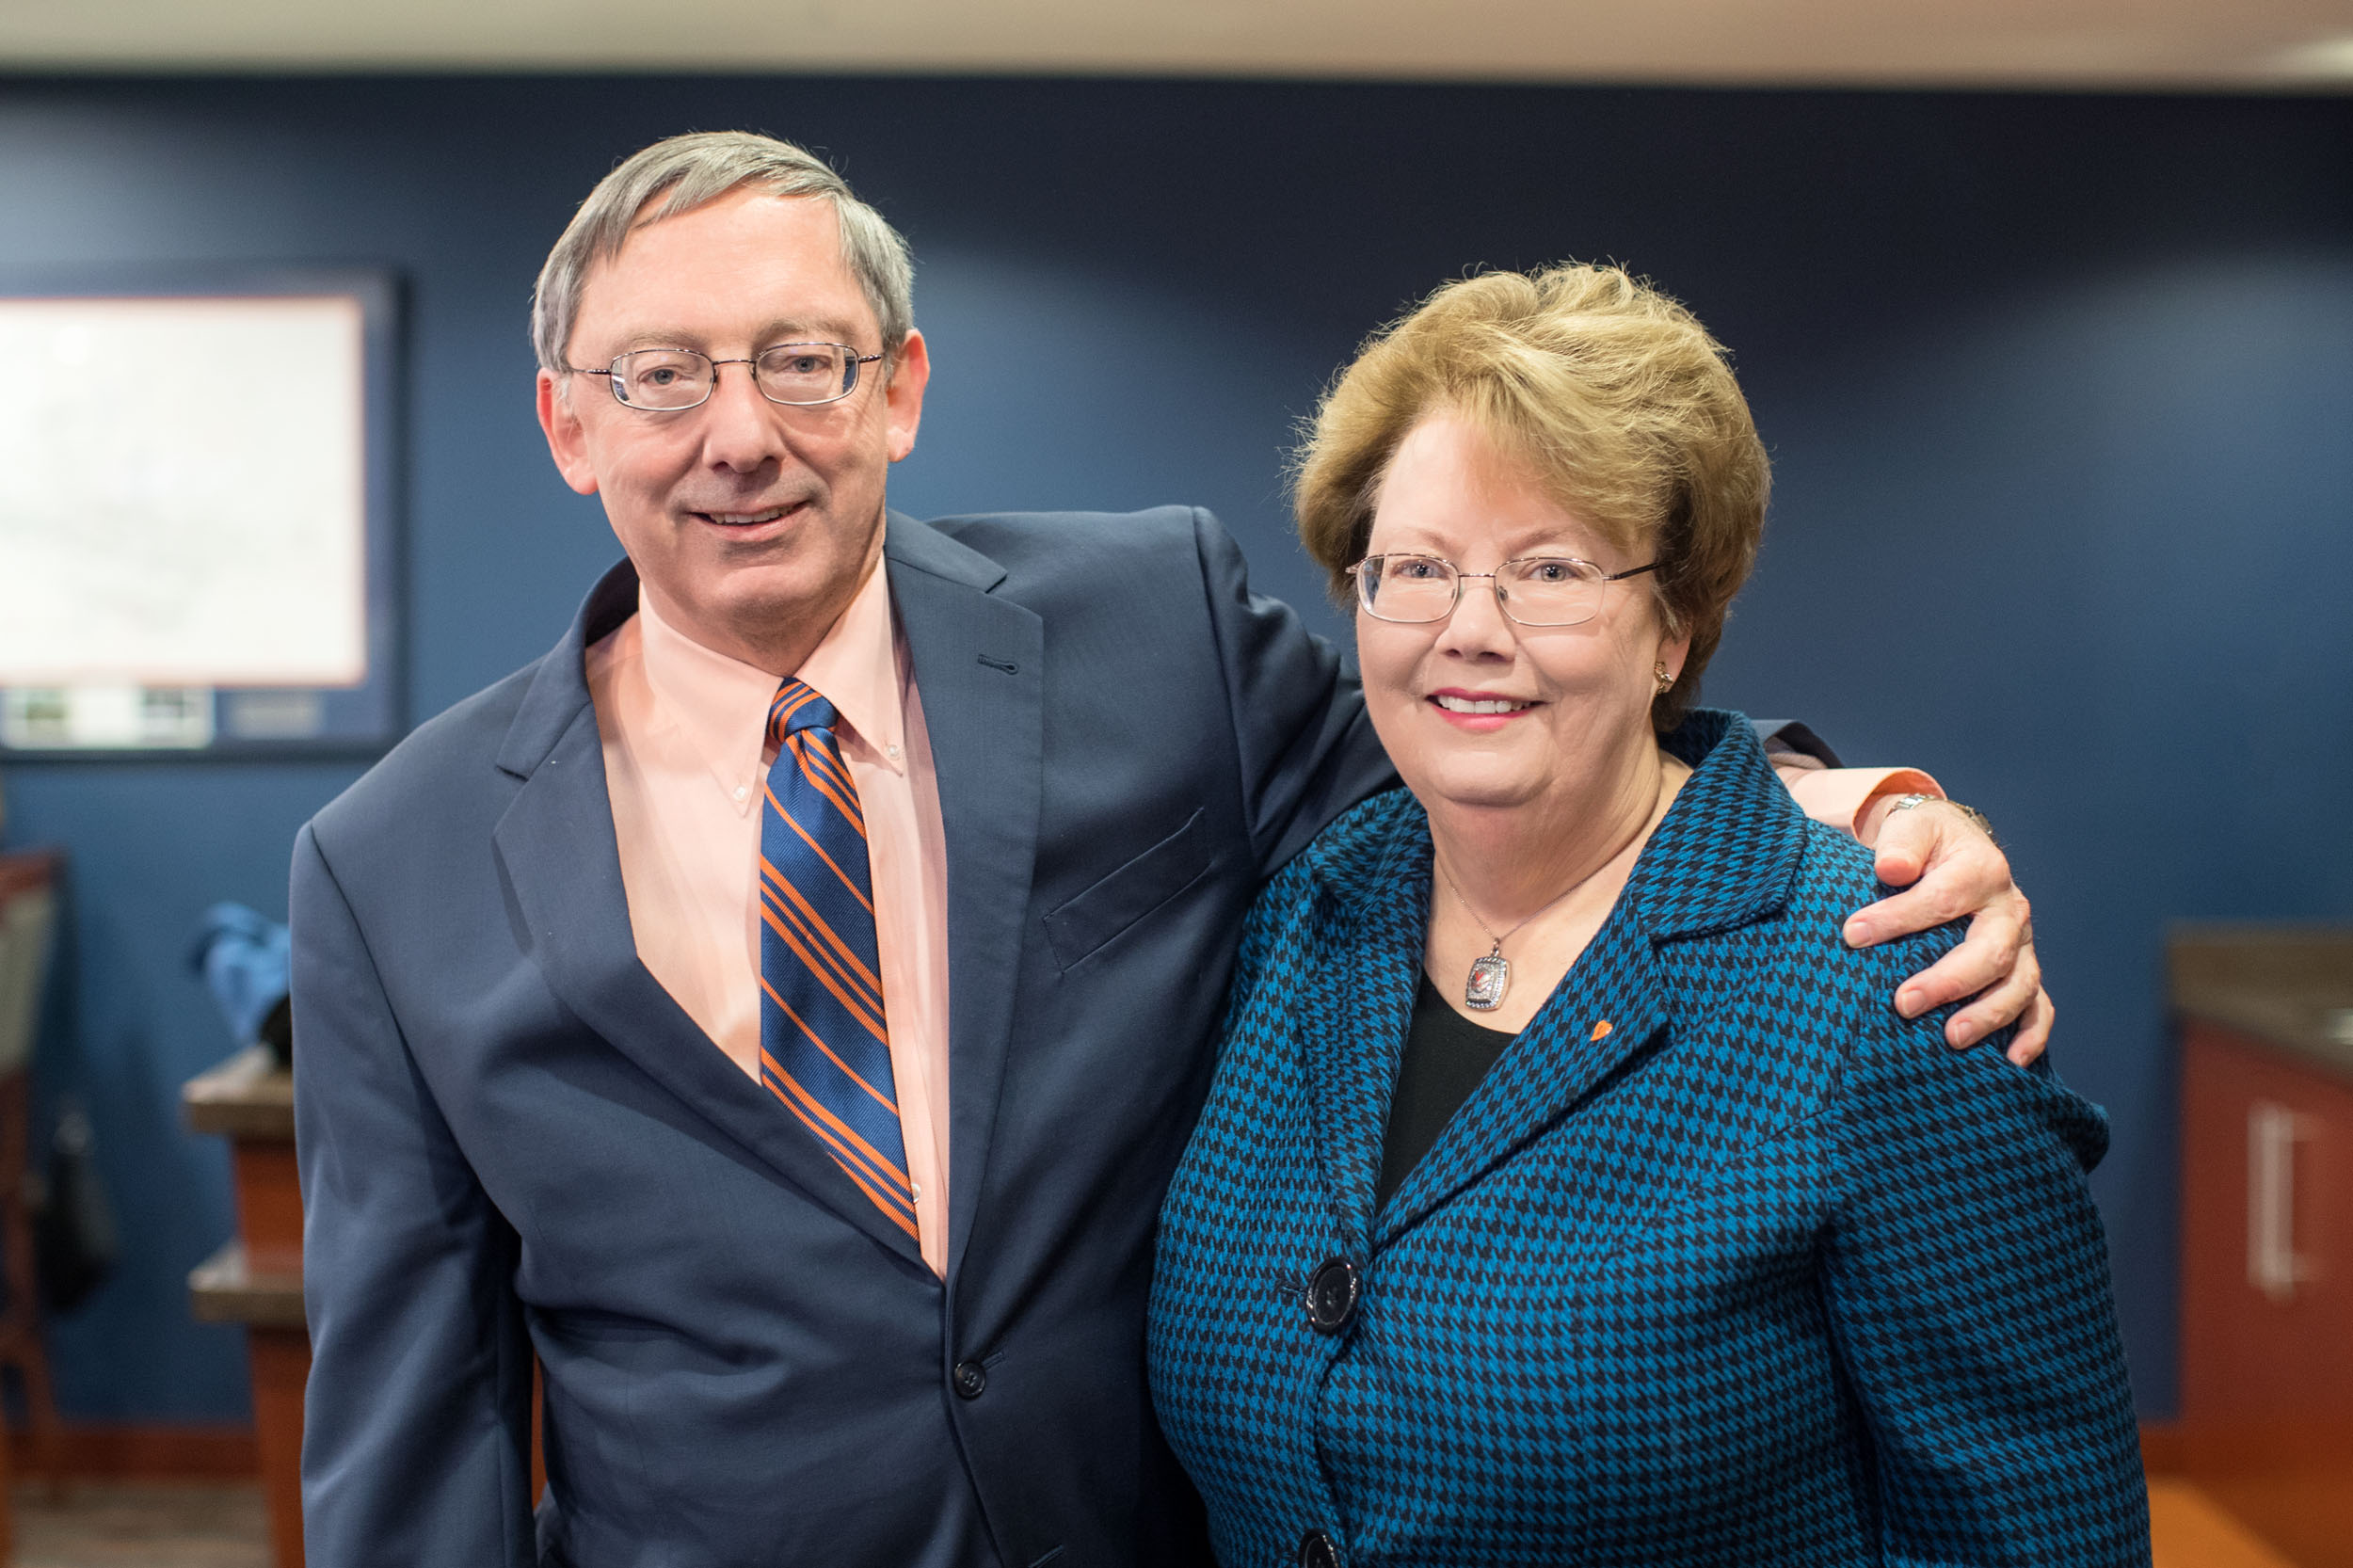 UVA President Teresa A. Sullivan and her husband, Douglas Laycock, stand together smiling at the camera